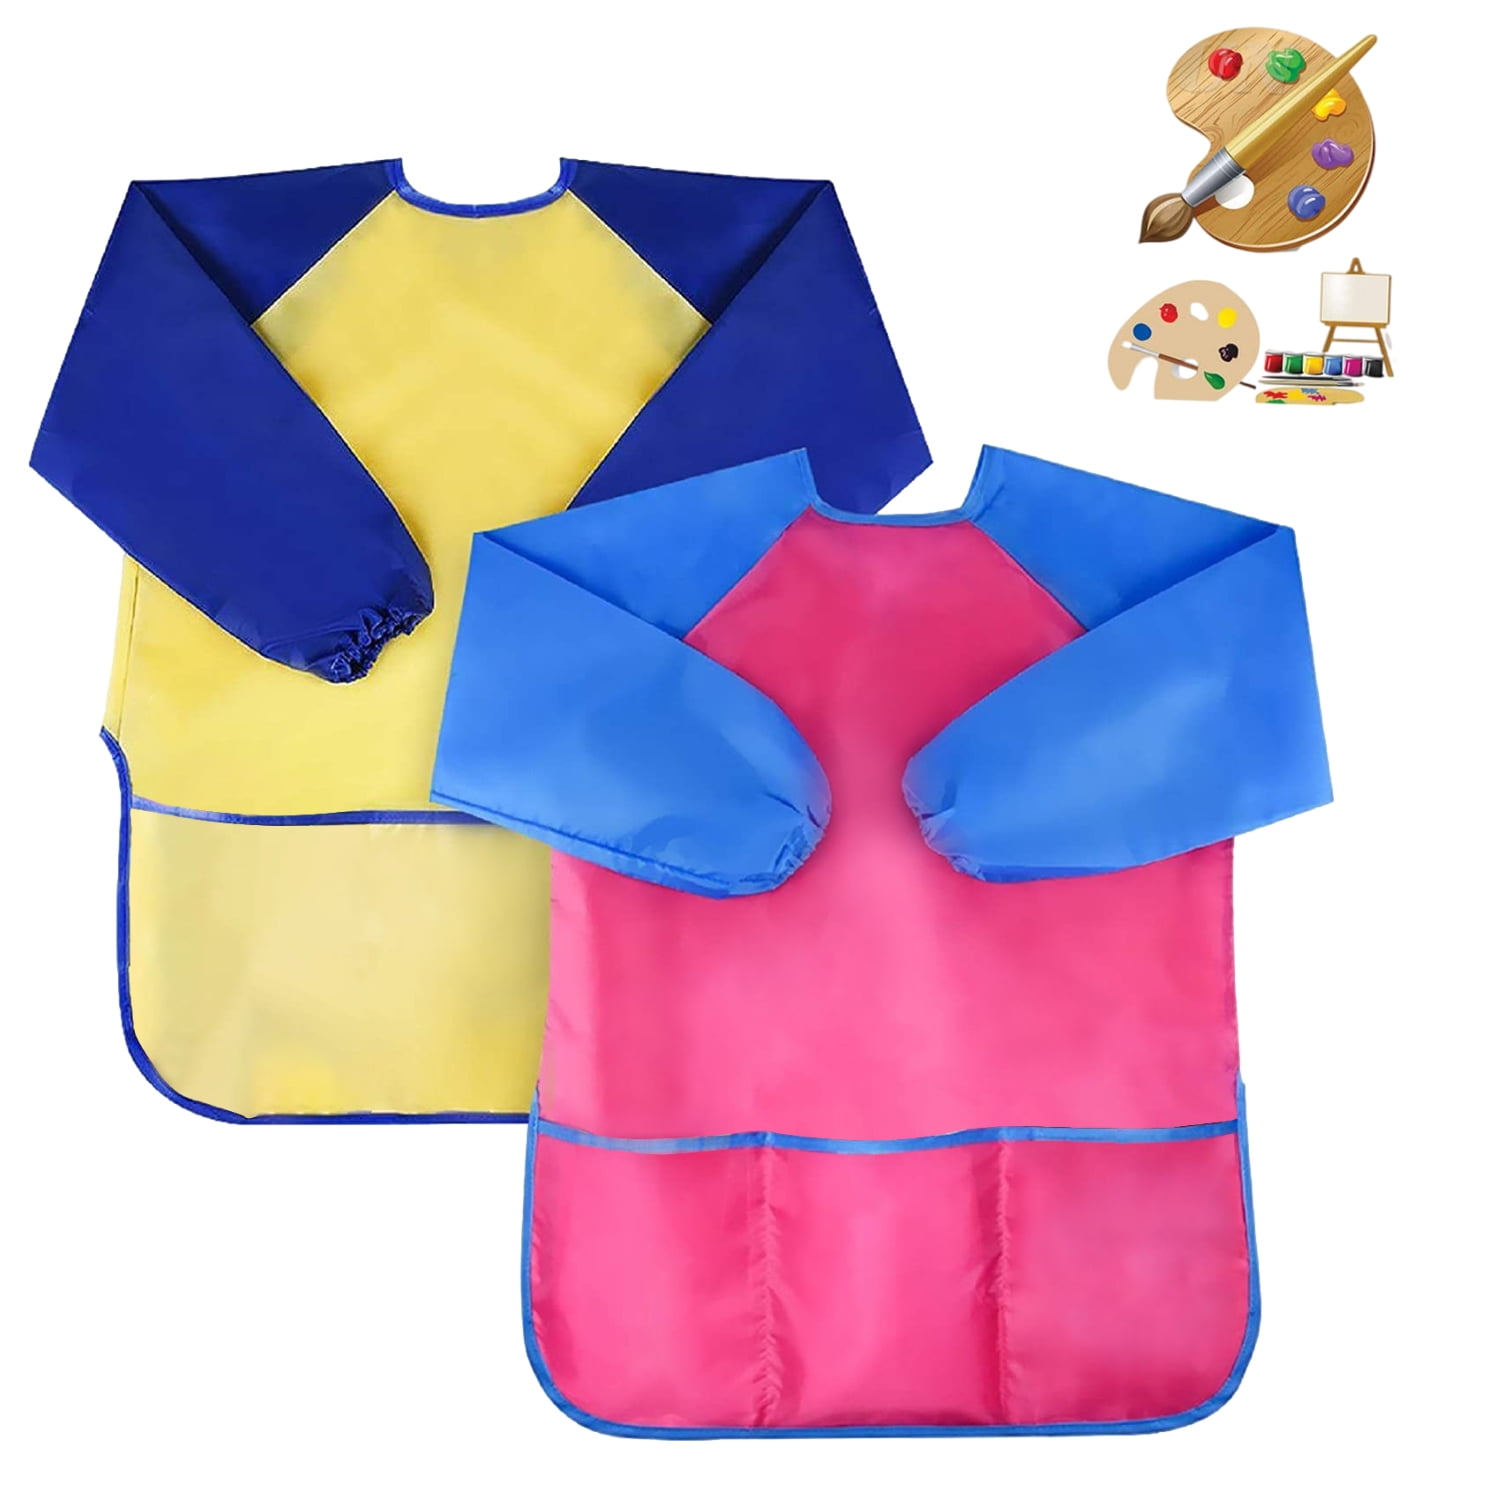 Paints and Brushes not Included -1.4 ft X1.7 ft 2 Piece Waterproof Childrens Art Smock Kids Art Aprons with Long Sleeve 3 Roomy Pockets,Art Painting Supplies 43X52CM 